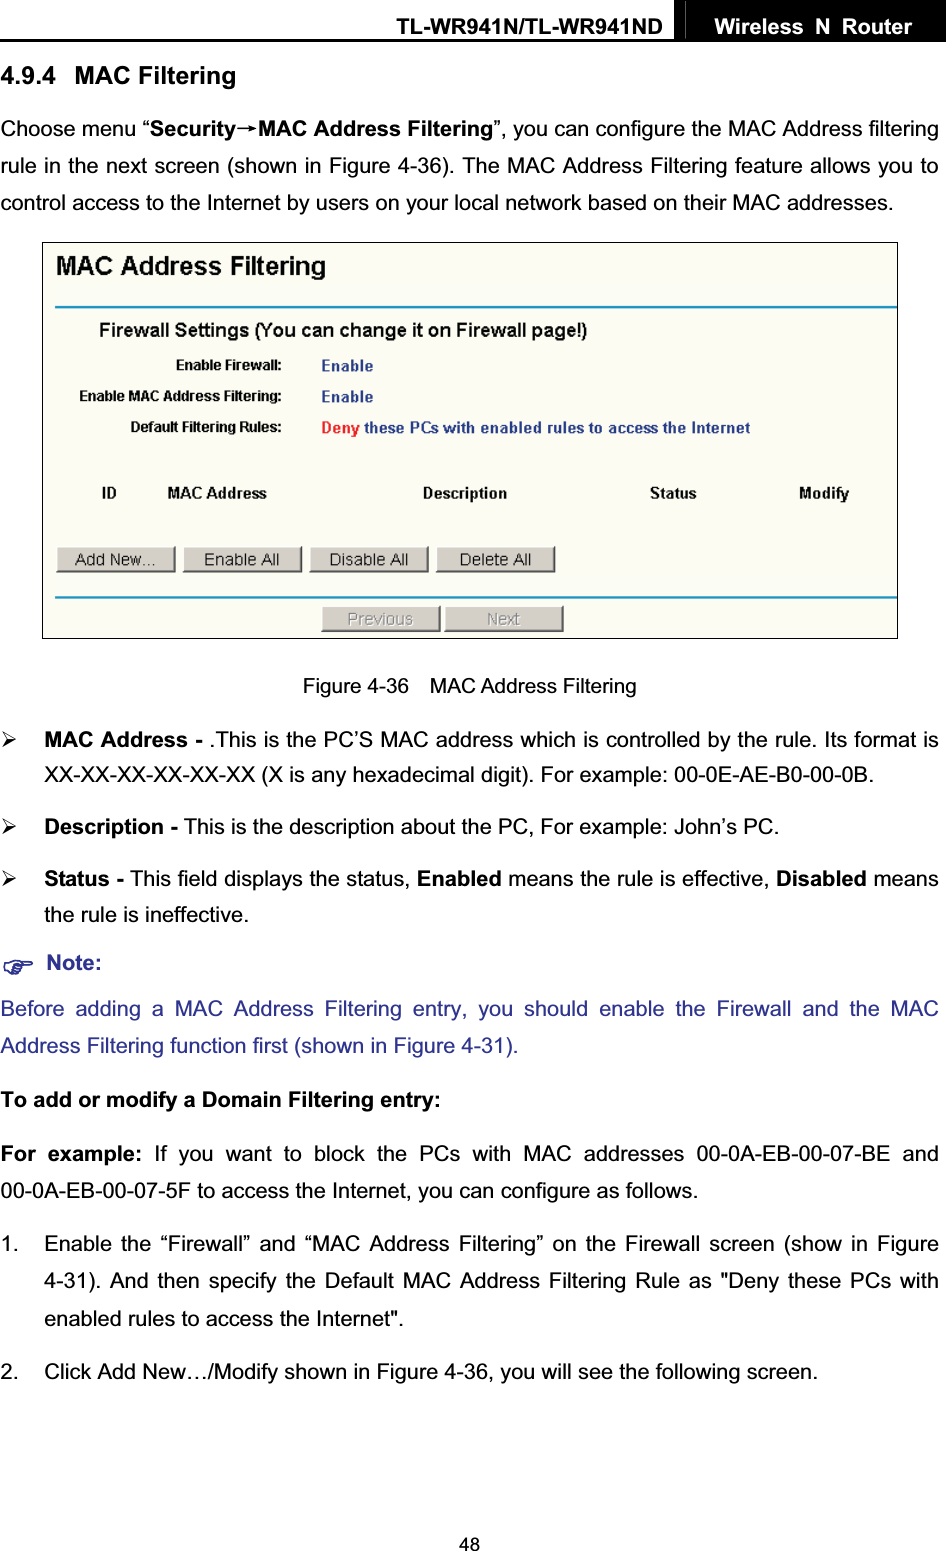 TL-WR941N/TL-WR941ND  Wireless N Router  484.9.4 MAC Filtering Choose menu “SecurityėMAC Address Filtering”, you can configure the MAC Address filtering rule in the next screen (shown in Figure 4-36). The MAC Address Filtering feature allows you to control access to the Internet by users on your local network based on their MAC addresses. Figure 4-36  MAC Address Filtering ¾MAC Address - .This is the PC’S MAC address which is controlled by the rule. Its format is XX-XX-XX-XX-XX-XX (X is any hexadecimal digit). For example: 00-0E-AE-B0-00-0B. ¾Description - This is the description about the PC, For example: John’s PC. ¾Status - This field displays the status, Enabled means the rule is effective, Disabled means the rule is ineffective. )Note:Before adding a MAC Address Filtering entry, you should enable the Firewall and the MAC Address Filtering function first (shown in Figure 4-31). To add or modify a Domain Filtering entry: For example: If you want to block the PCs with MAC addresses 00-0A-EB-00-07-BE and 00-0A-EB-00-07-5F to access the Internet, you can configure as follows. 1.  Enable the “Firewall” and “MAC Address Filtering” on the Firewall screen (show in Figure 4-31). And then specify the Default MAC Address Filtering Rule as &quot;Deny these PCs with enabled rules to access the Internet&quot;. 2.  Click Add New…/Modify shown in Figure 4-36, you will see the following screen. 